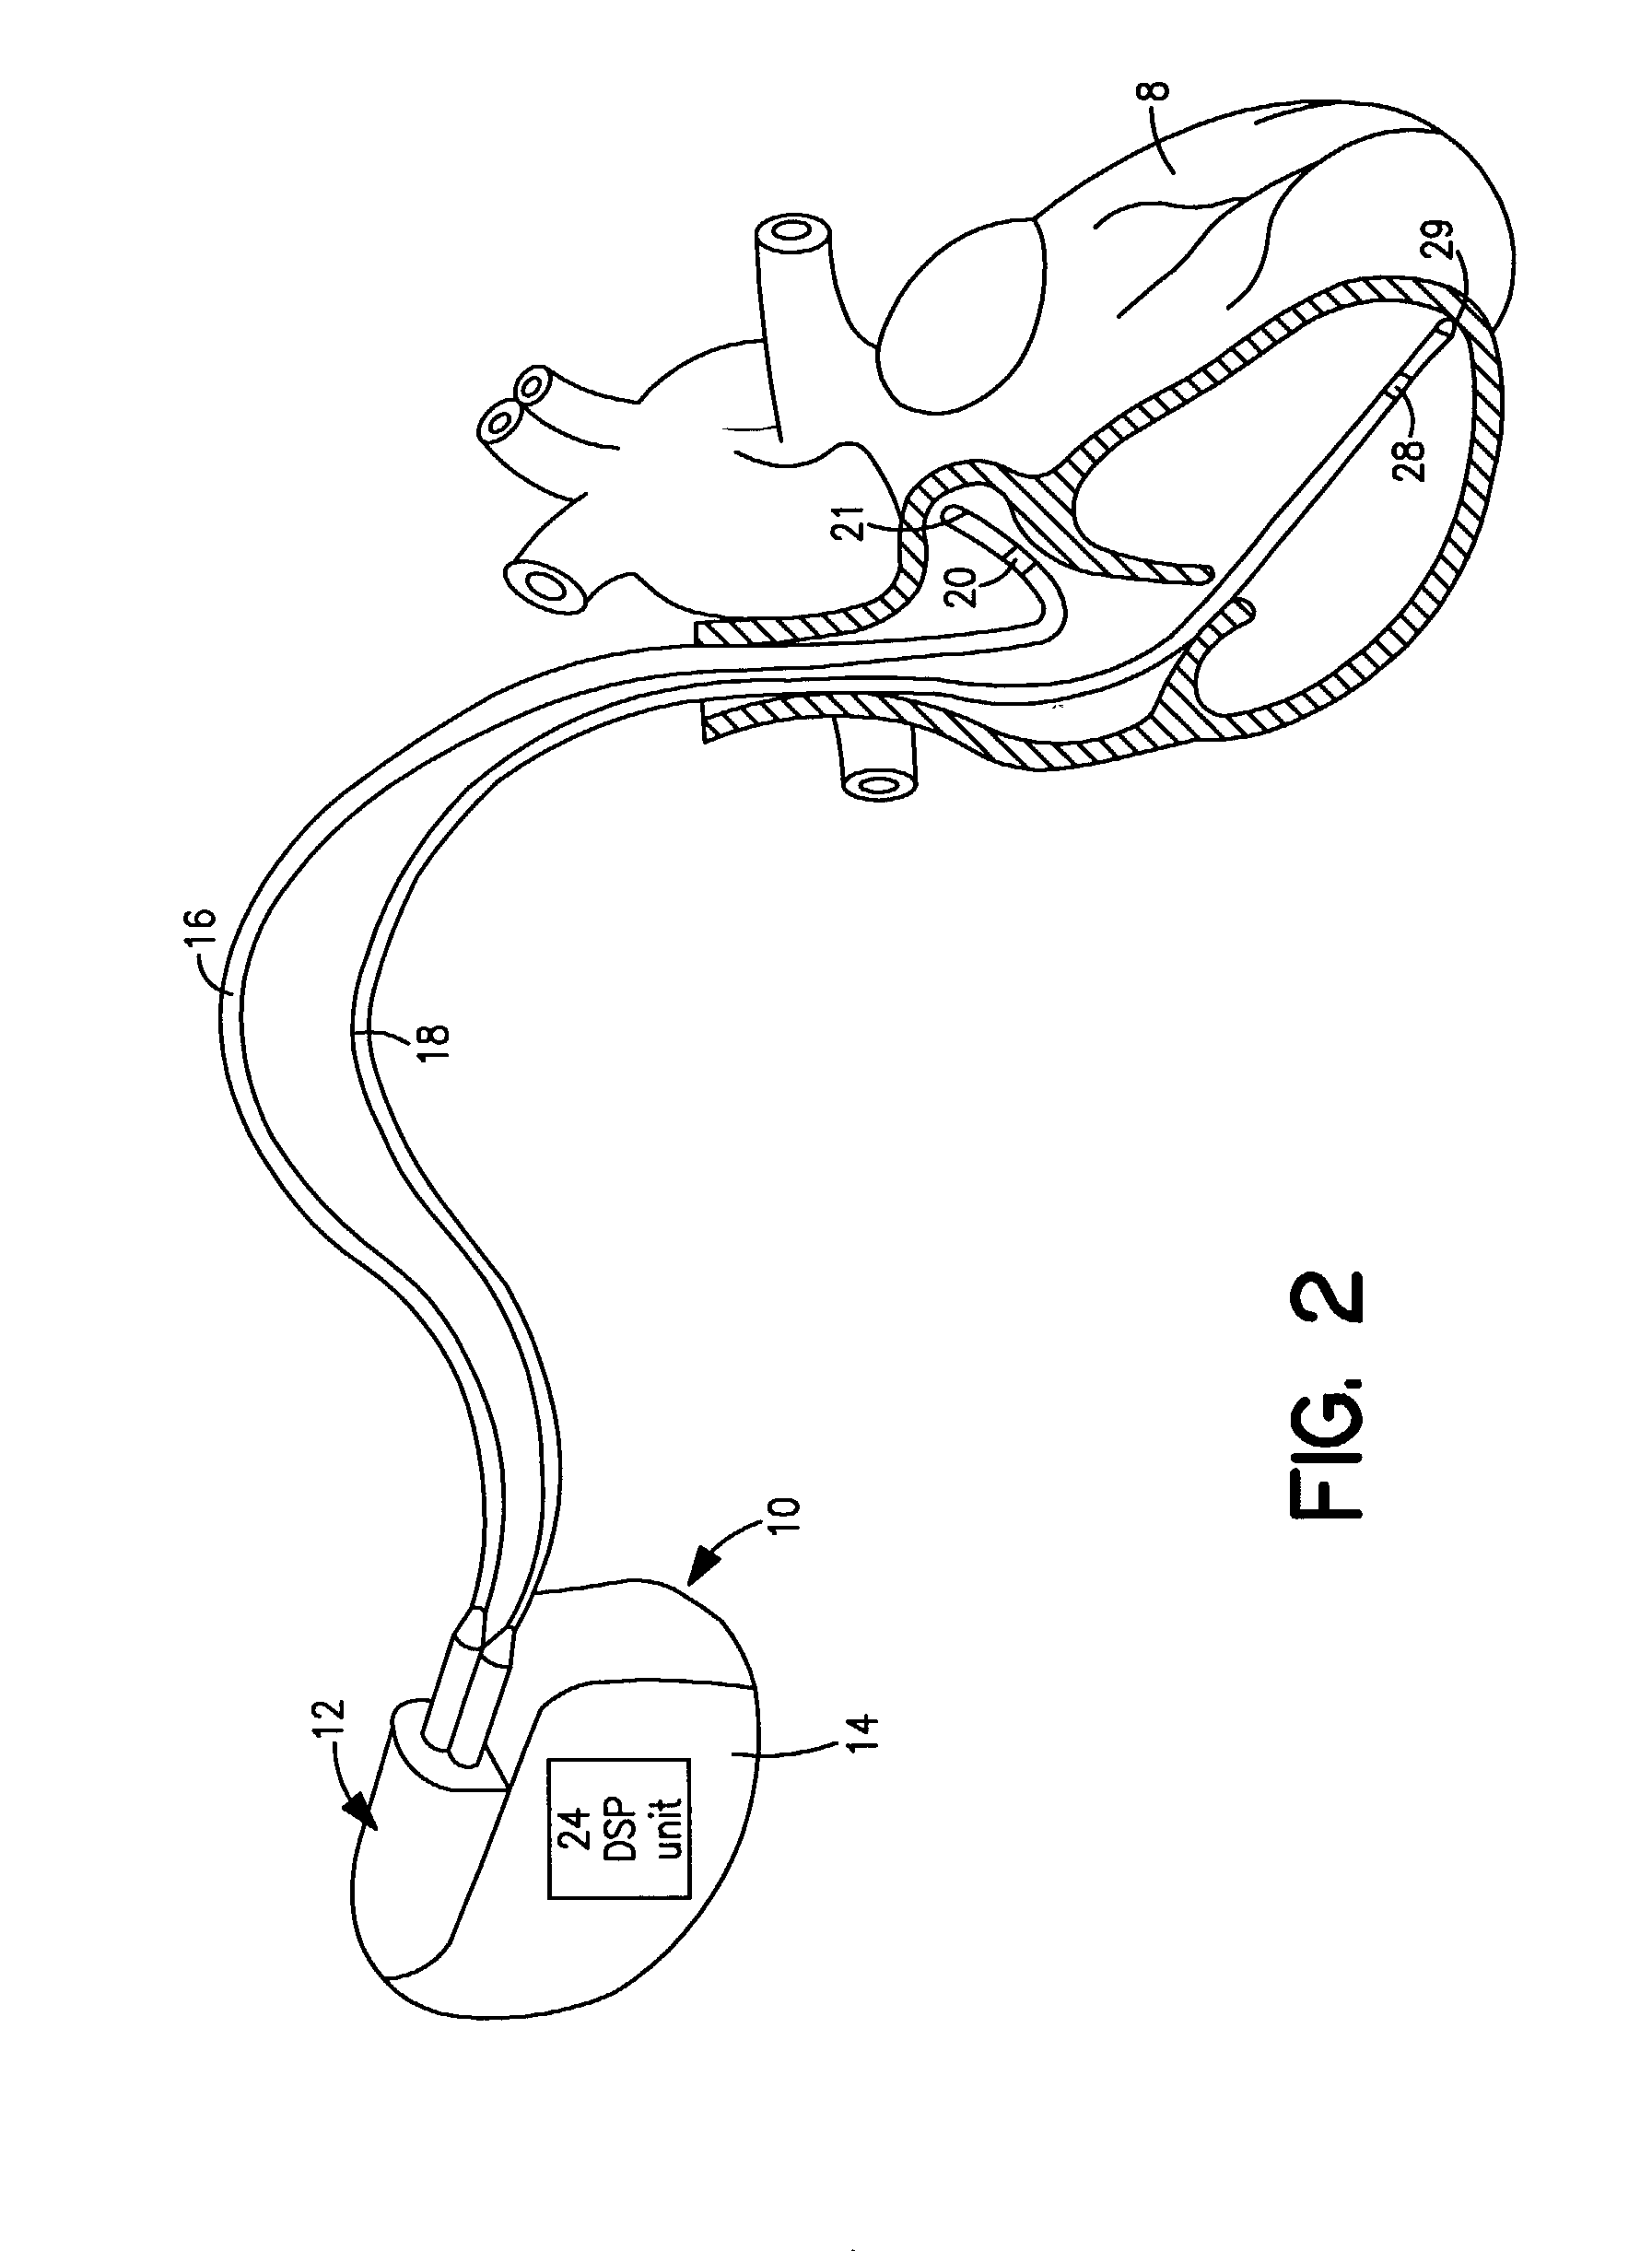 Method and system for compressing and storing data in a medical device having limited storage